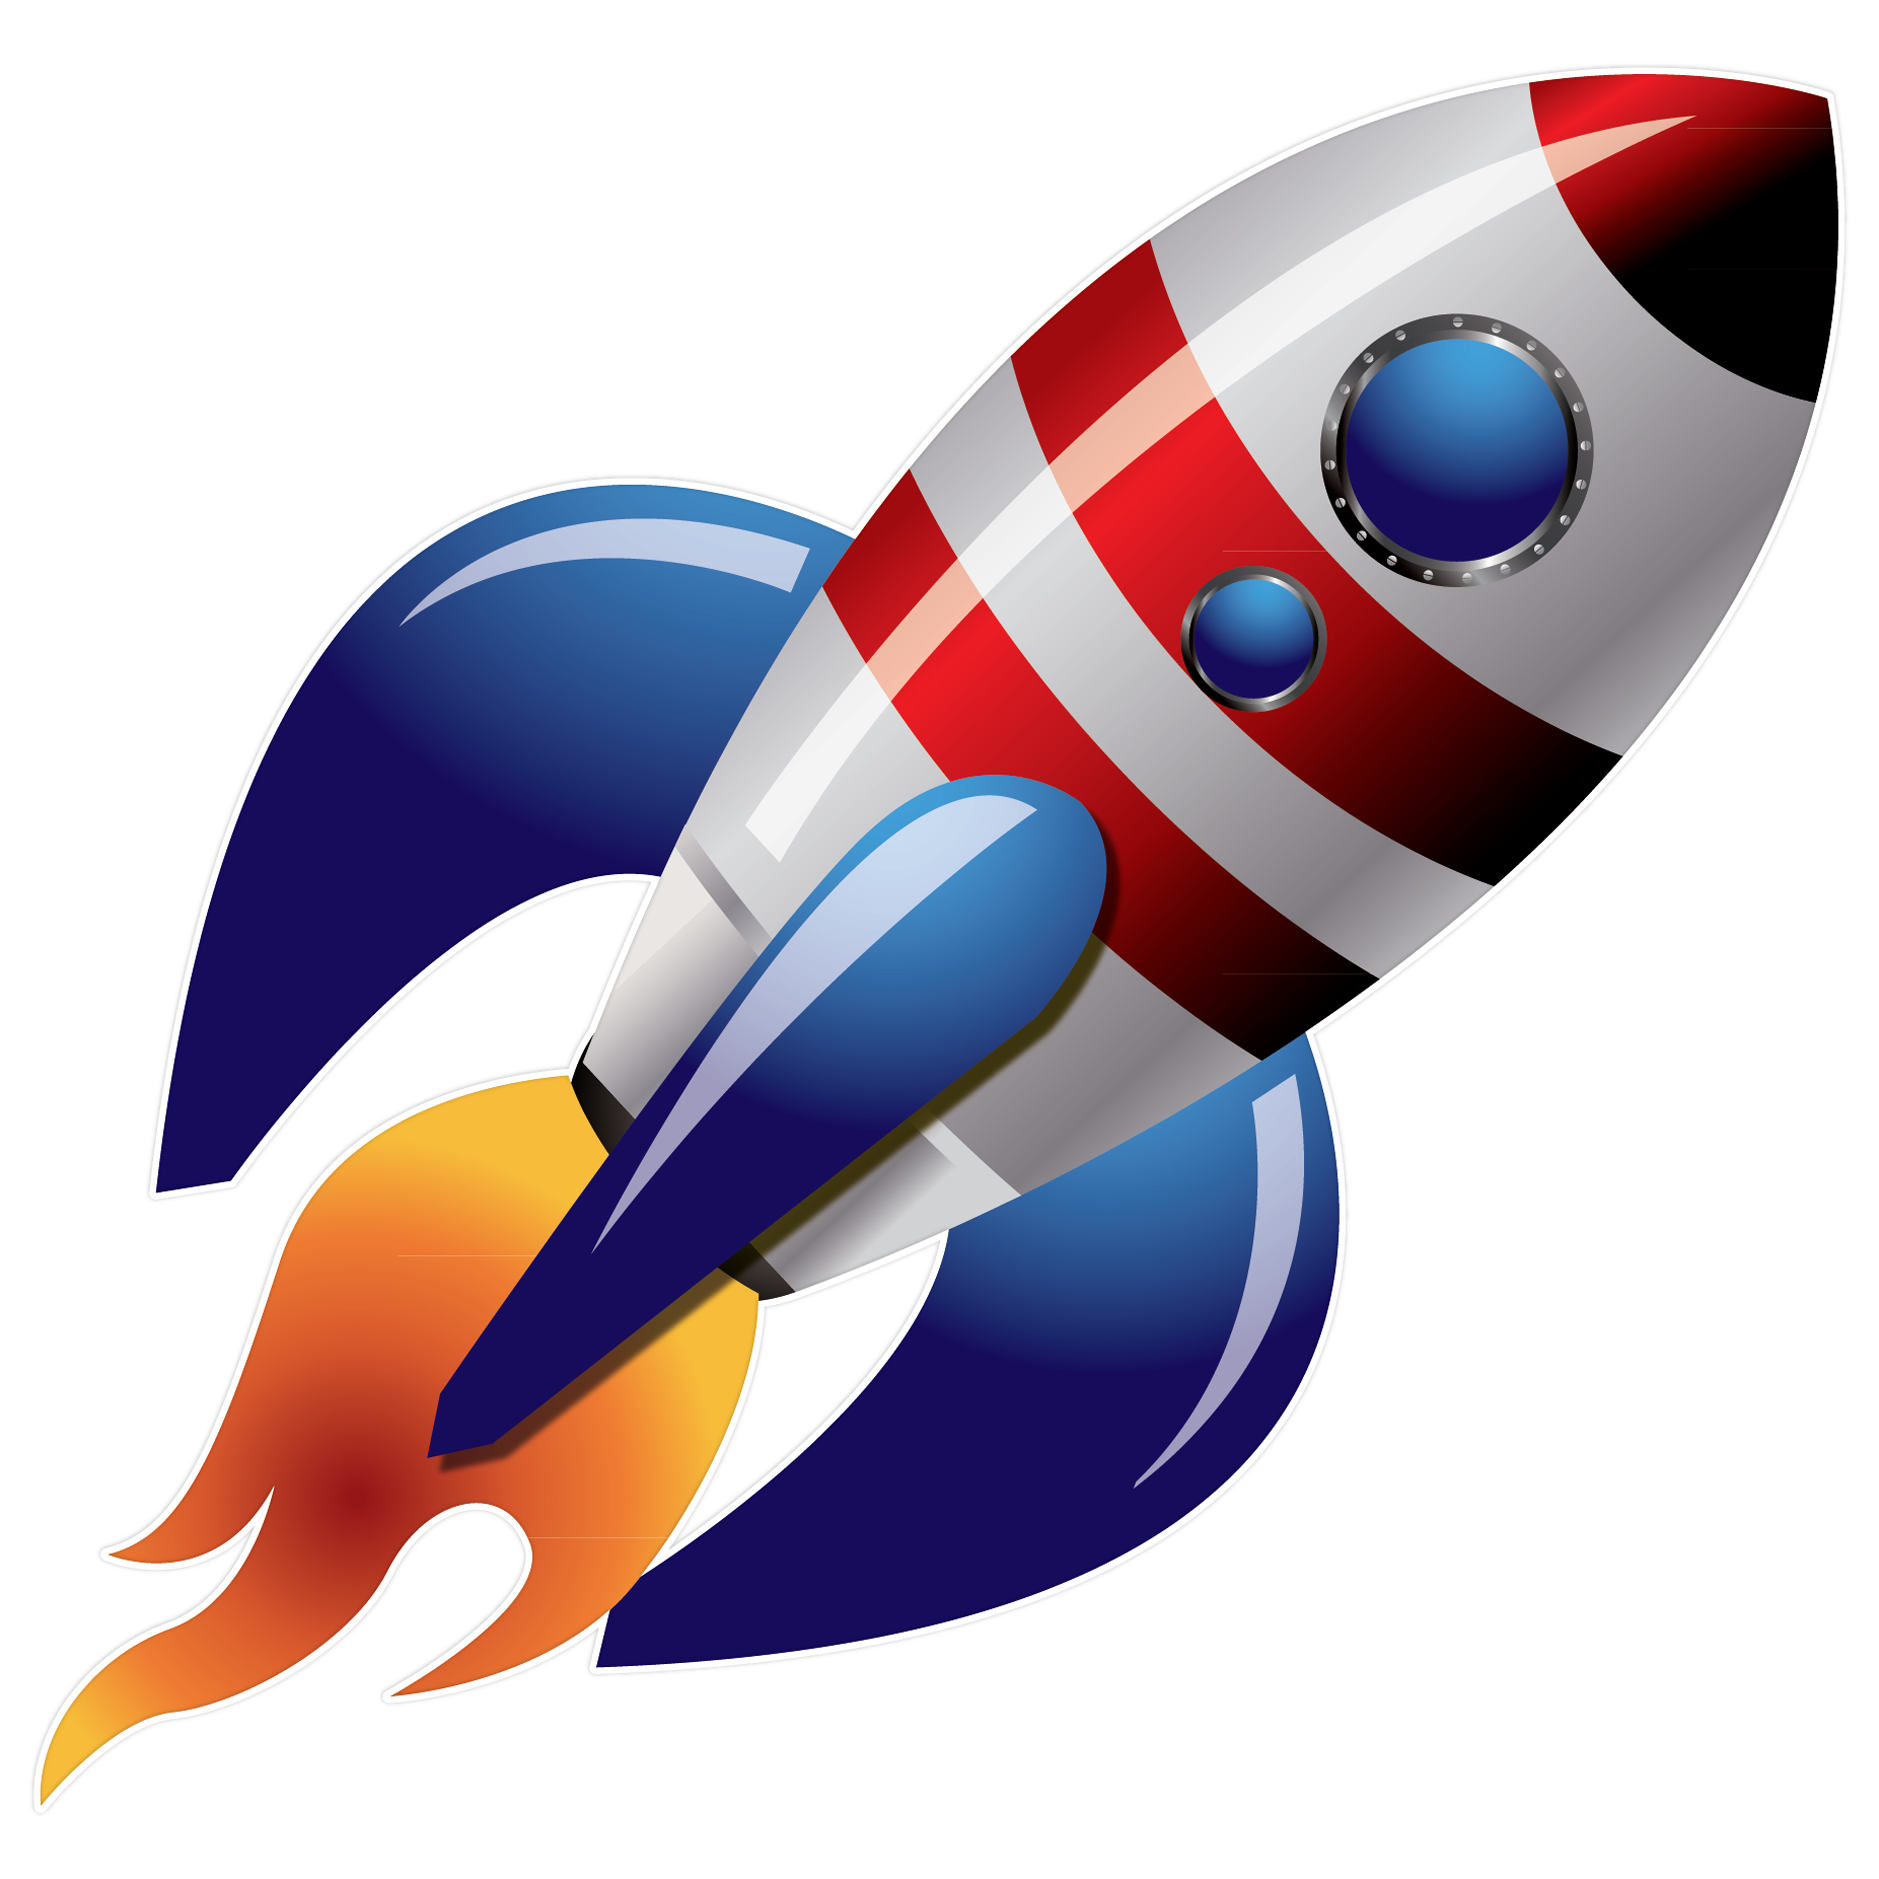 Rocket Hd Wallpapers #5 - Of Rockets, Transparent background PNG HD thumbnail